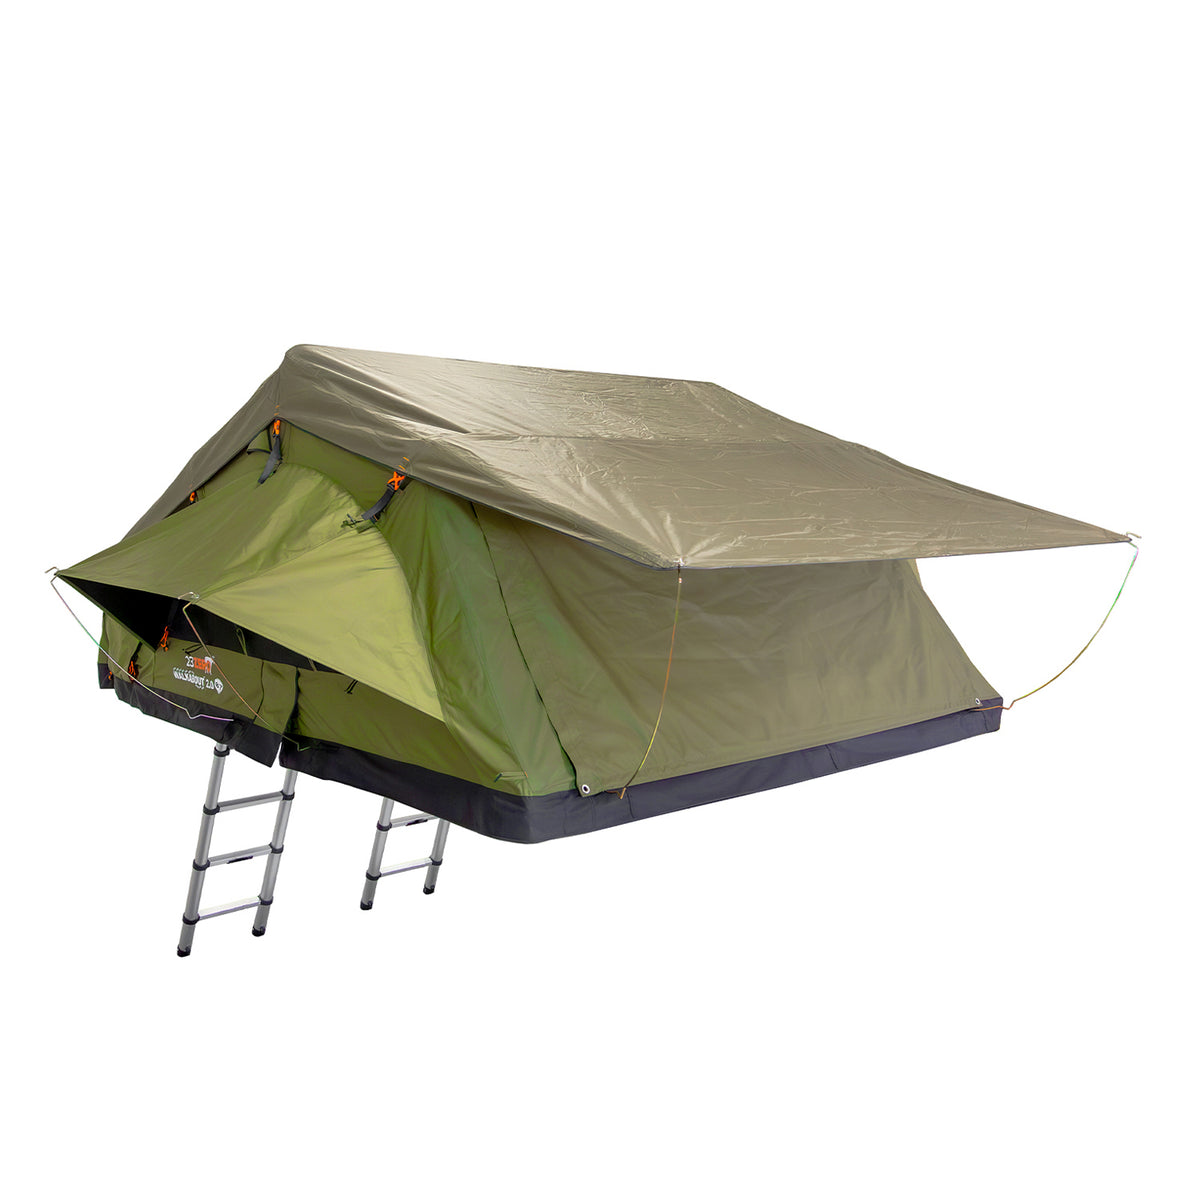 23ZERO Walkabout 87&quot; 2.0 6-Person Roof Top Tent